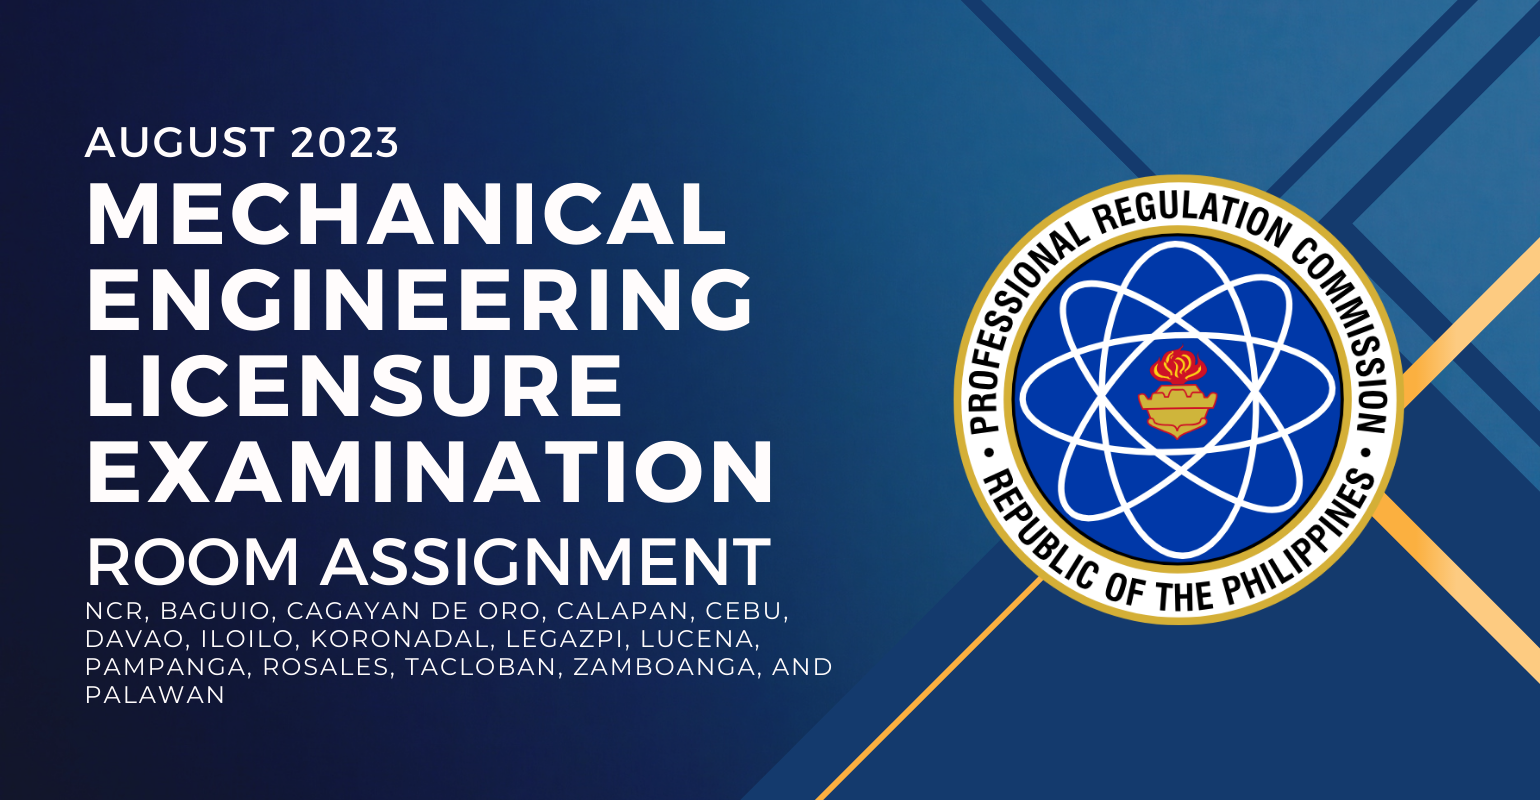 Room Assignment – August 2023 Mechanical Engineer Licensure Exam